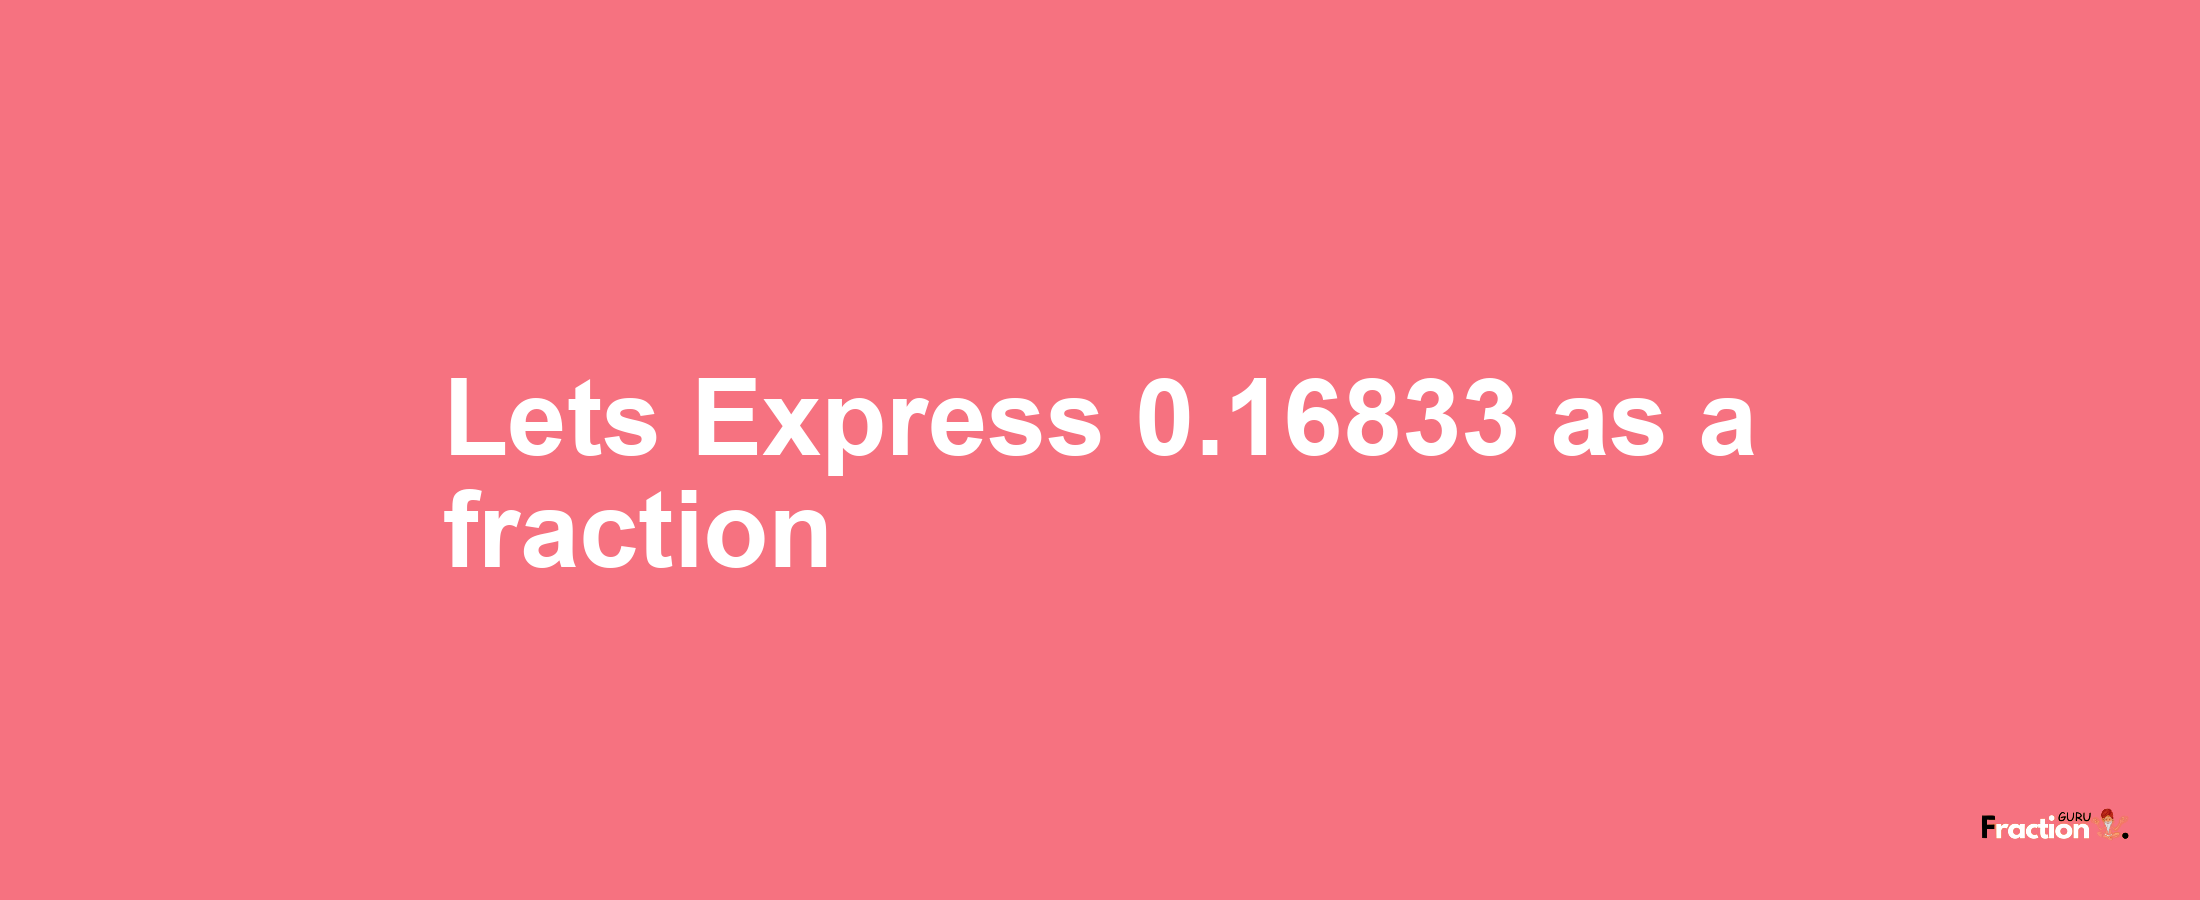 Lets Express 0.16833 as afraction